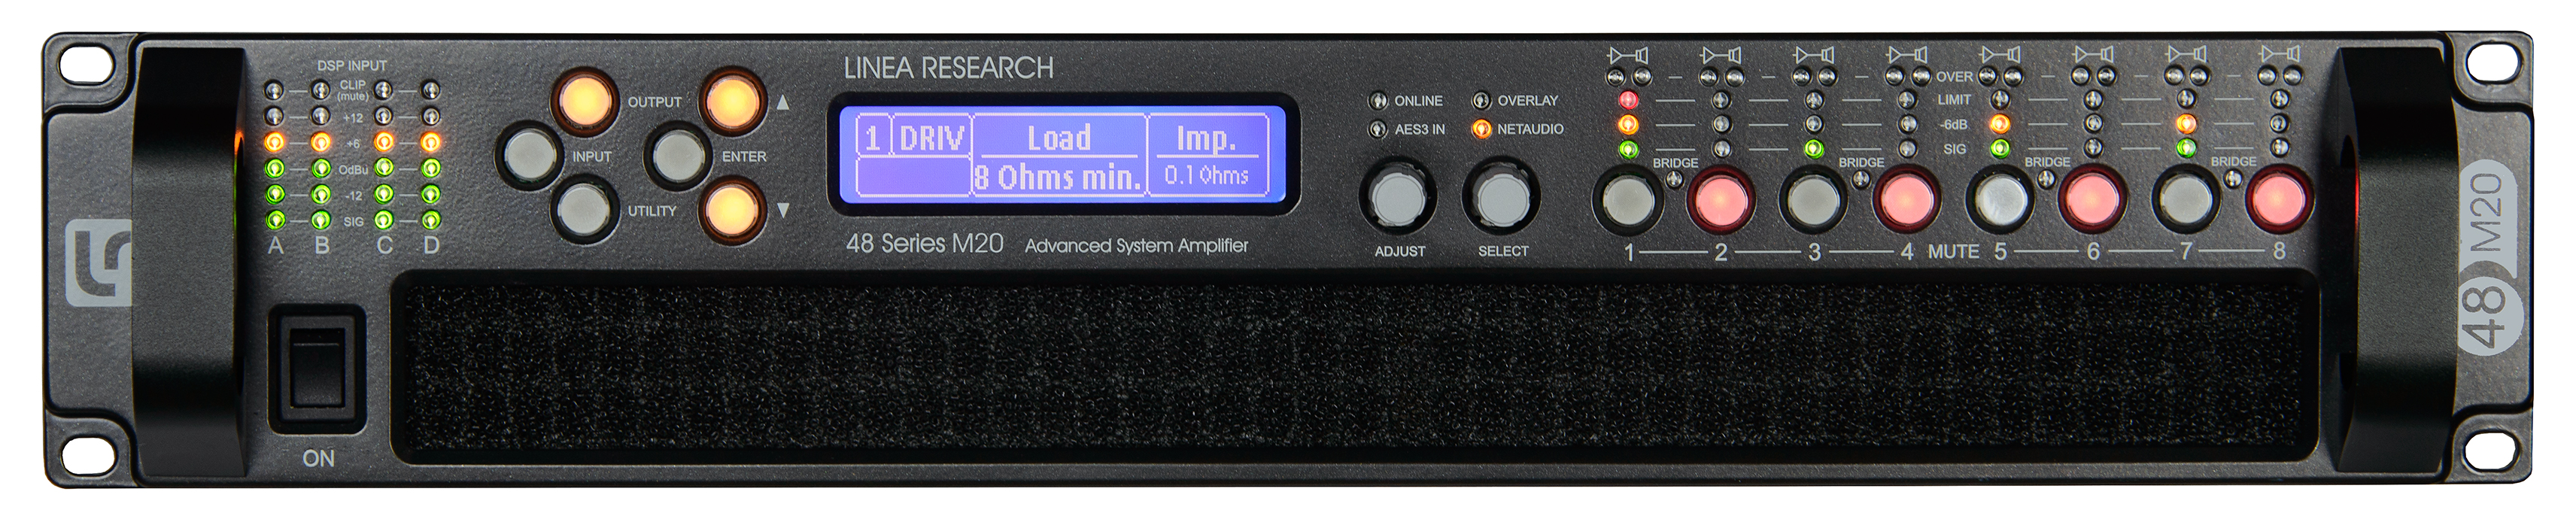 8-Ch. Touring Amps (48M)